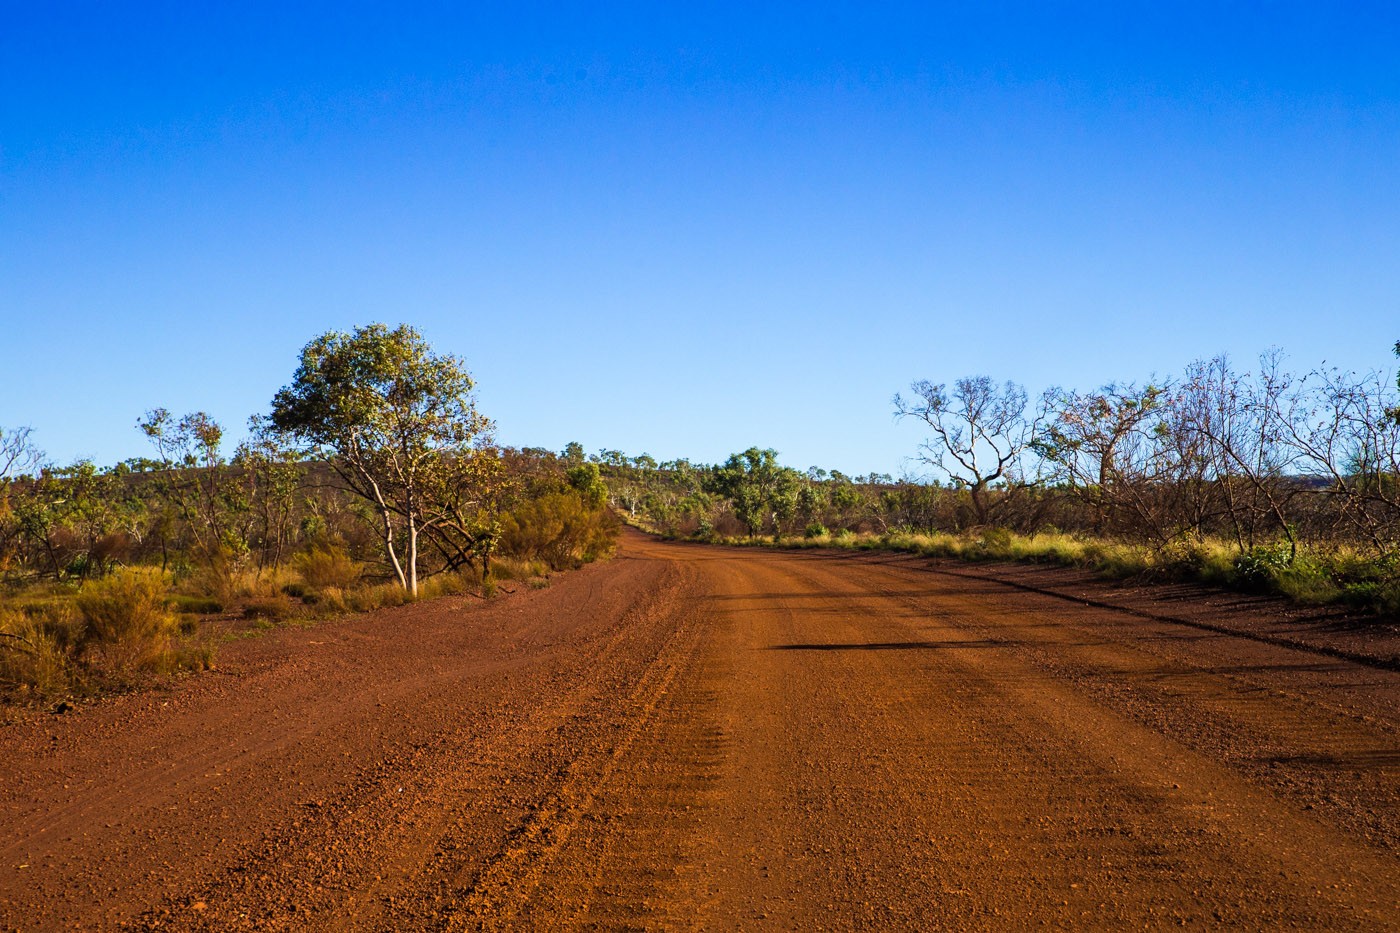 What You Need to Know Before Embarking on the Great Western Australia Road Trip